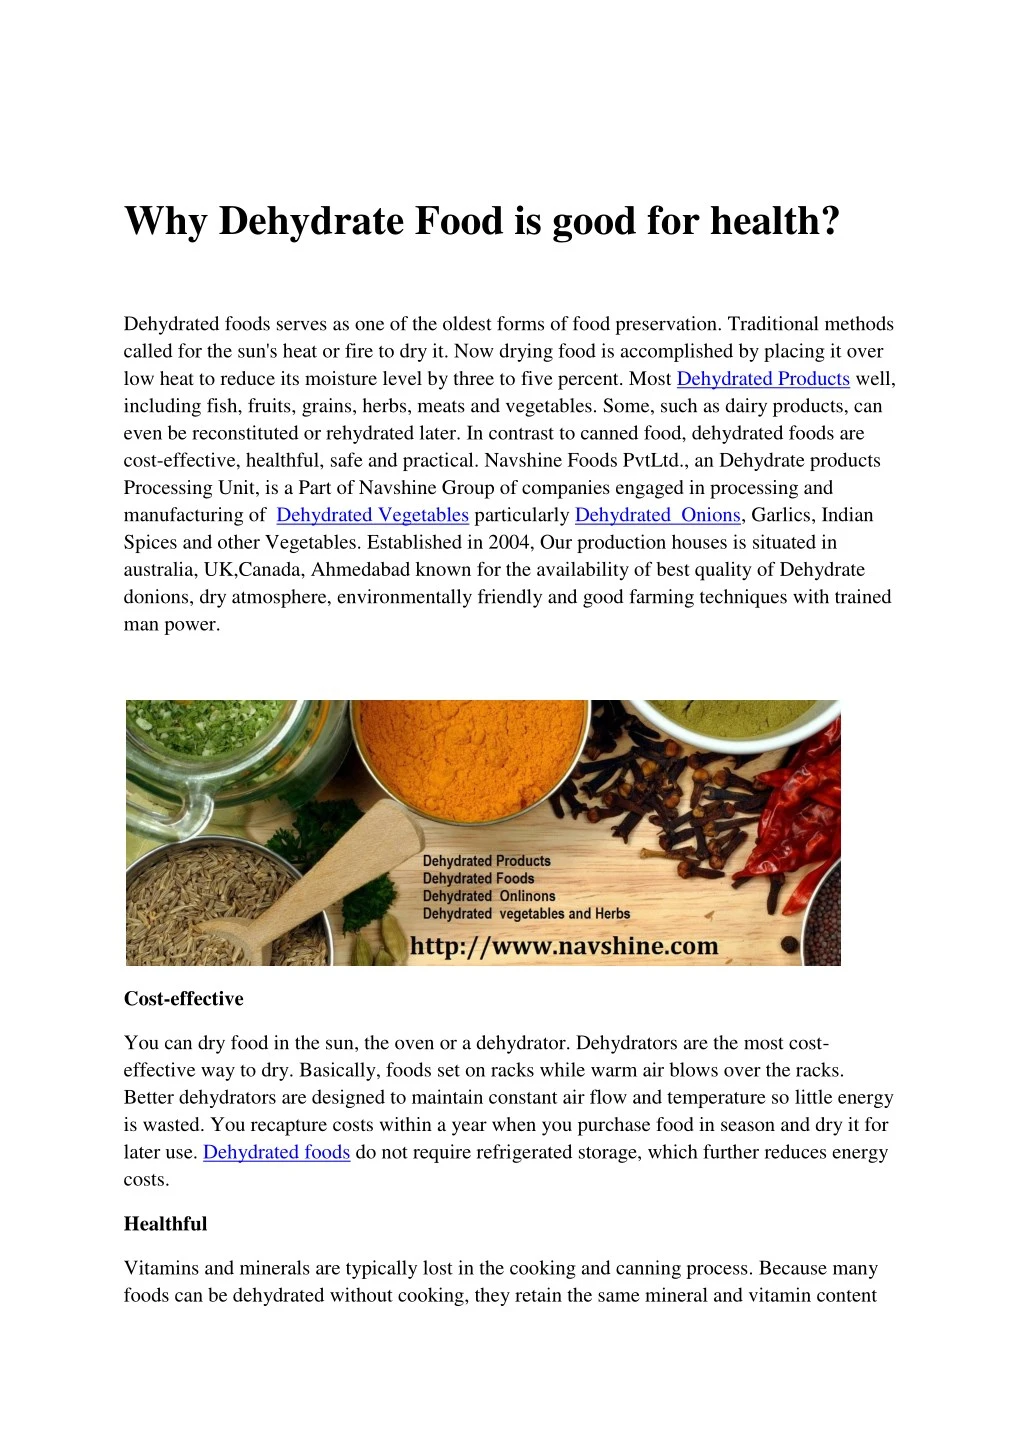 why dehydrate food is good for health